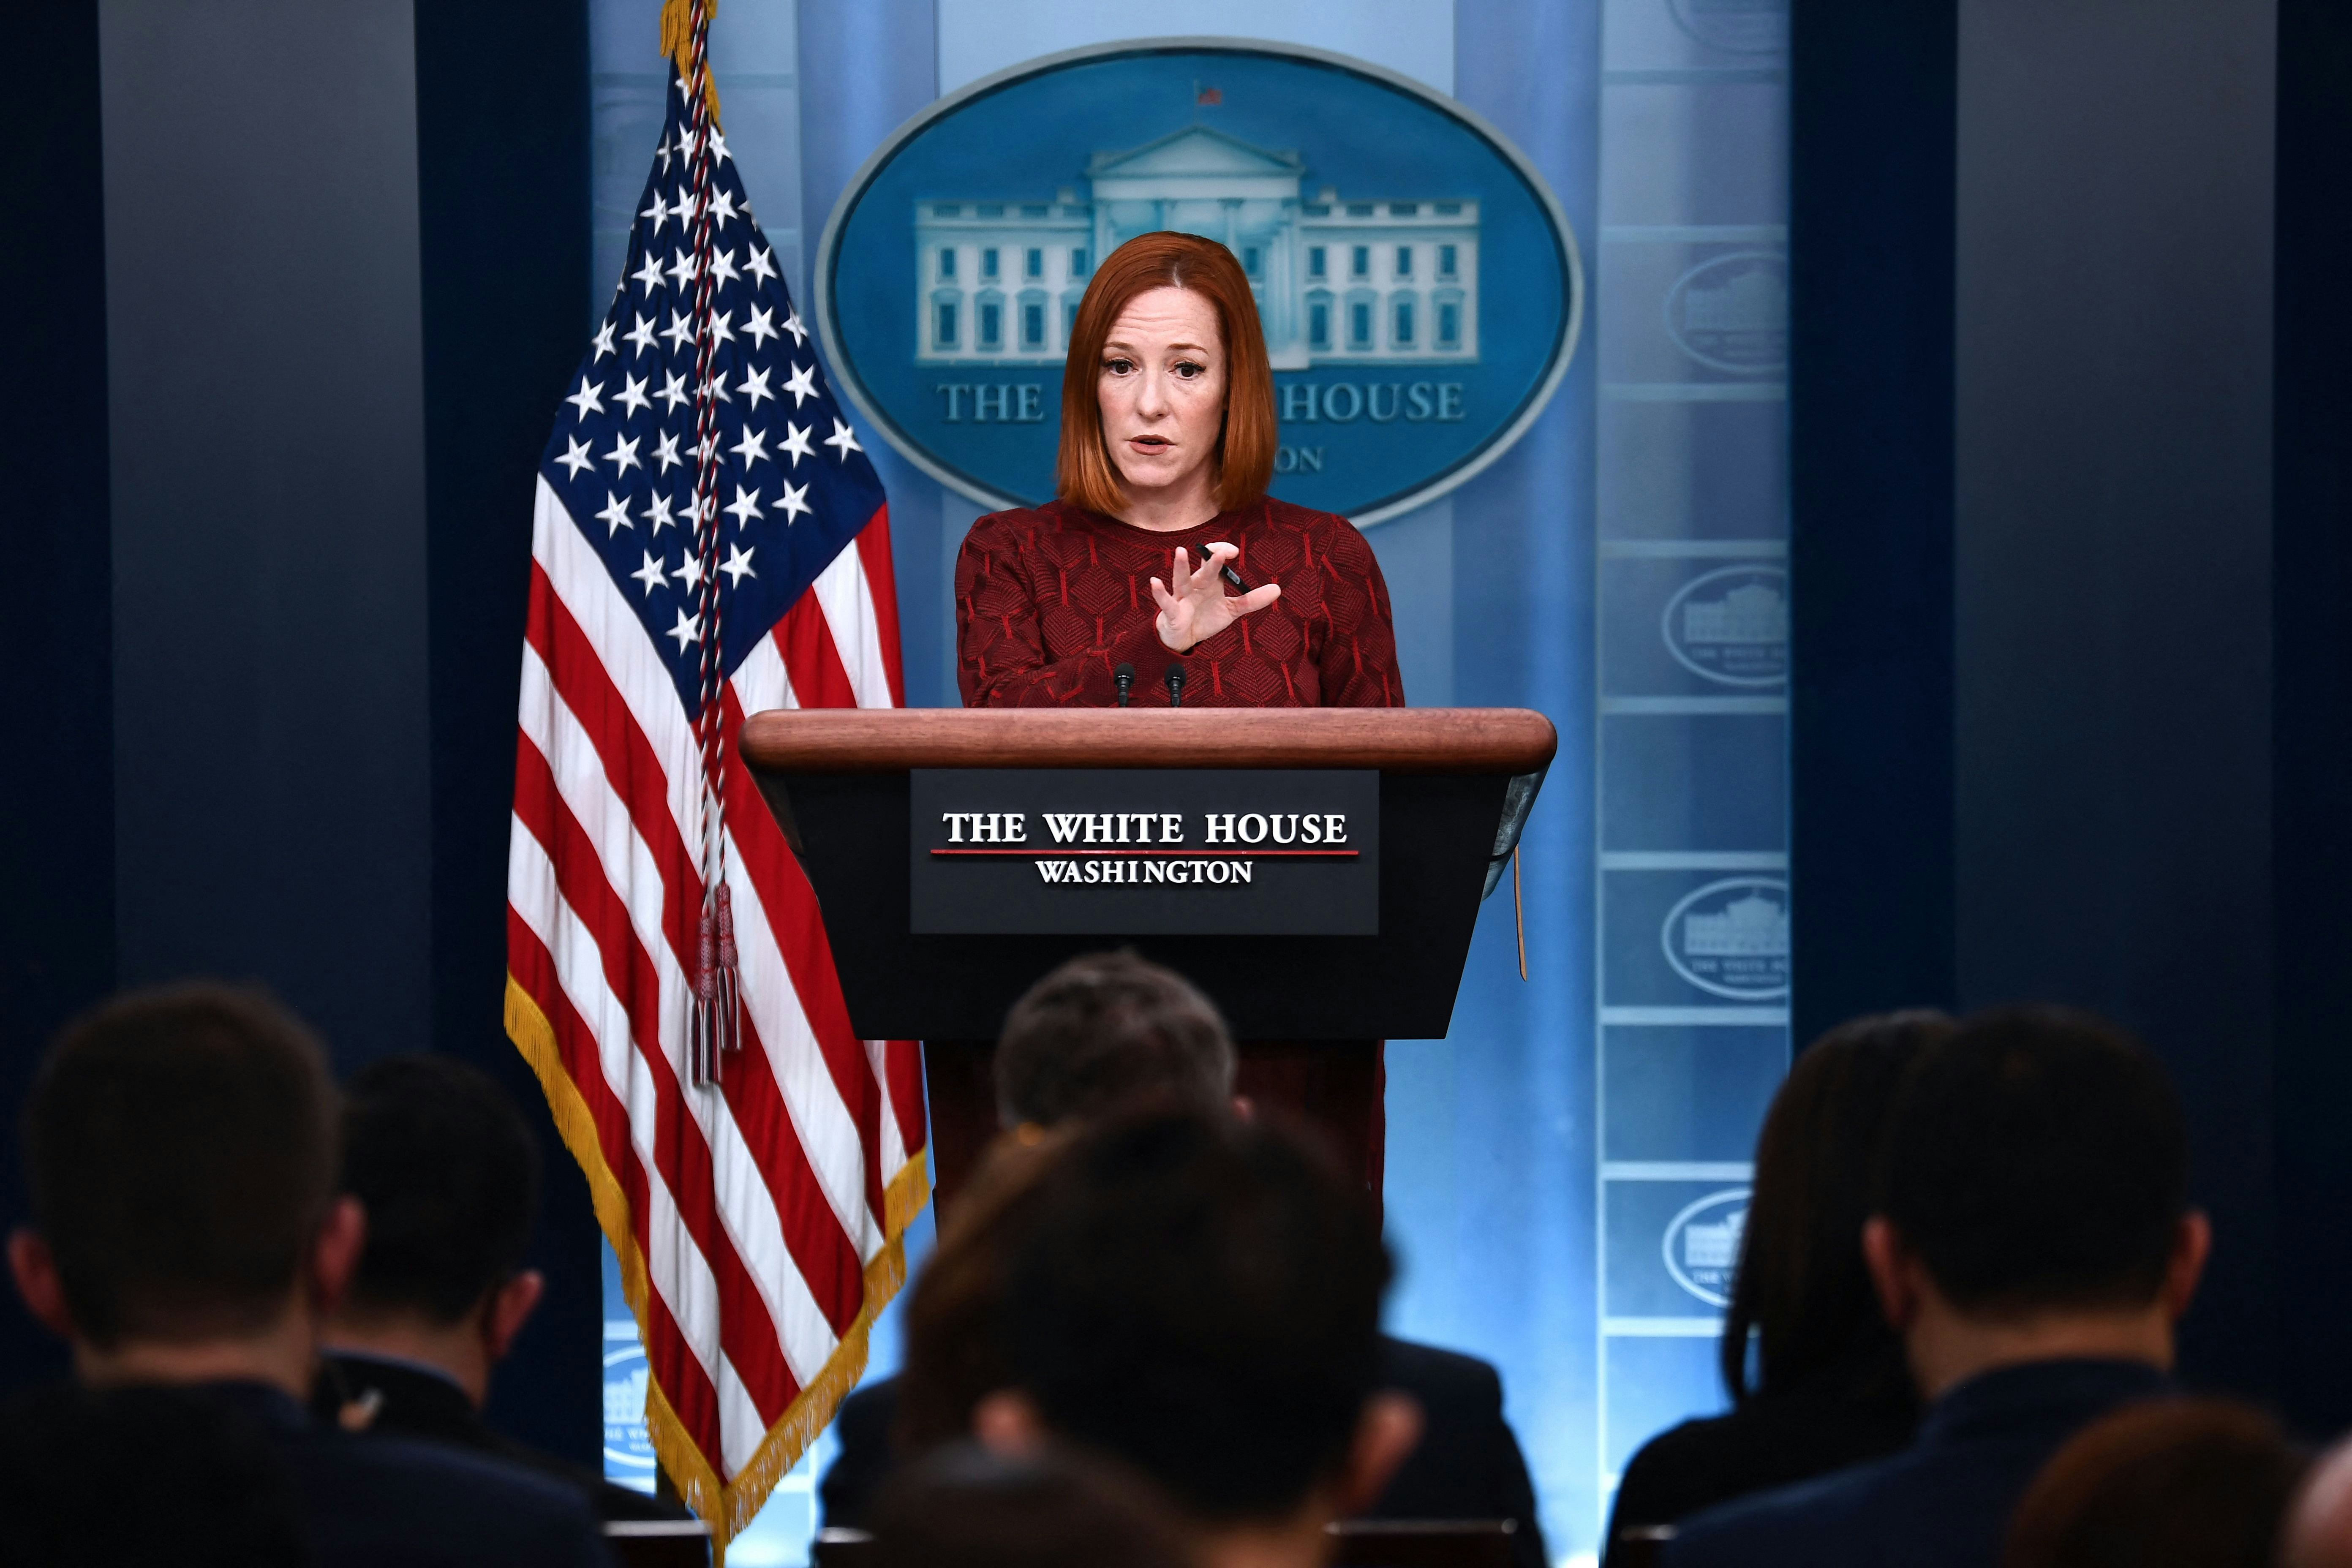 White House Press Secretary Jennifer Psaki speaks during the daily briefing in the James S. Brady press briefing room of the White House in Washington, DC, in Washington, DC on February 15, 2022. (Photo by Brendan Smialowski / AFP) (Photo by BRENDAN SMIALOWSKI/AFP via Getty Images)